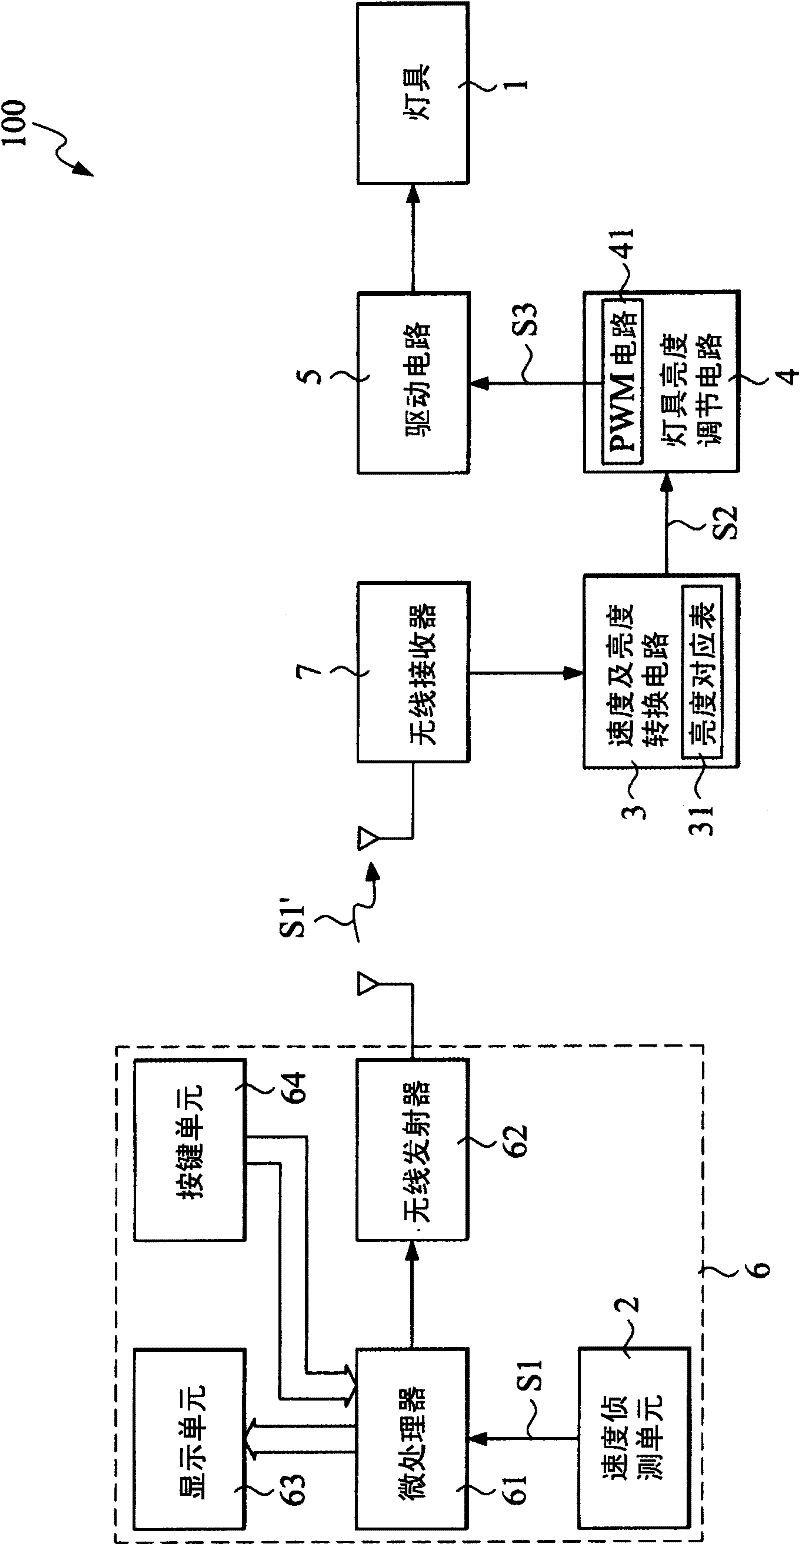 Control circuit of controlling the illumination brightness of bicycle according to bicycle speed